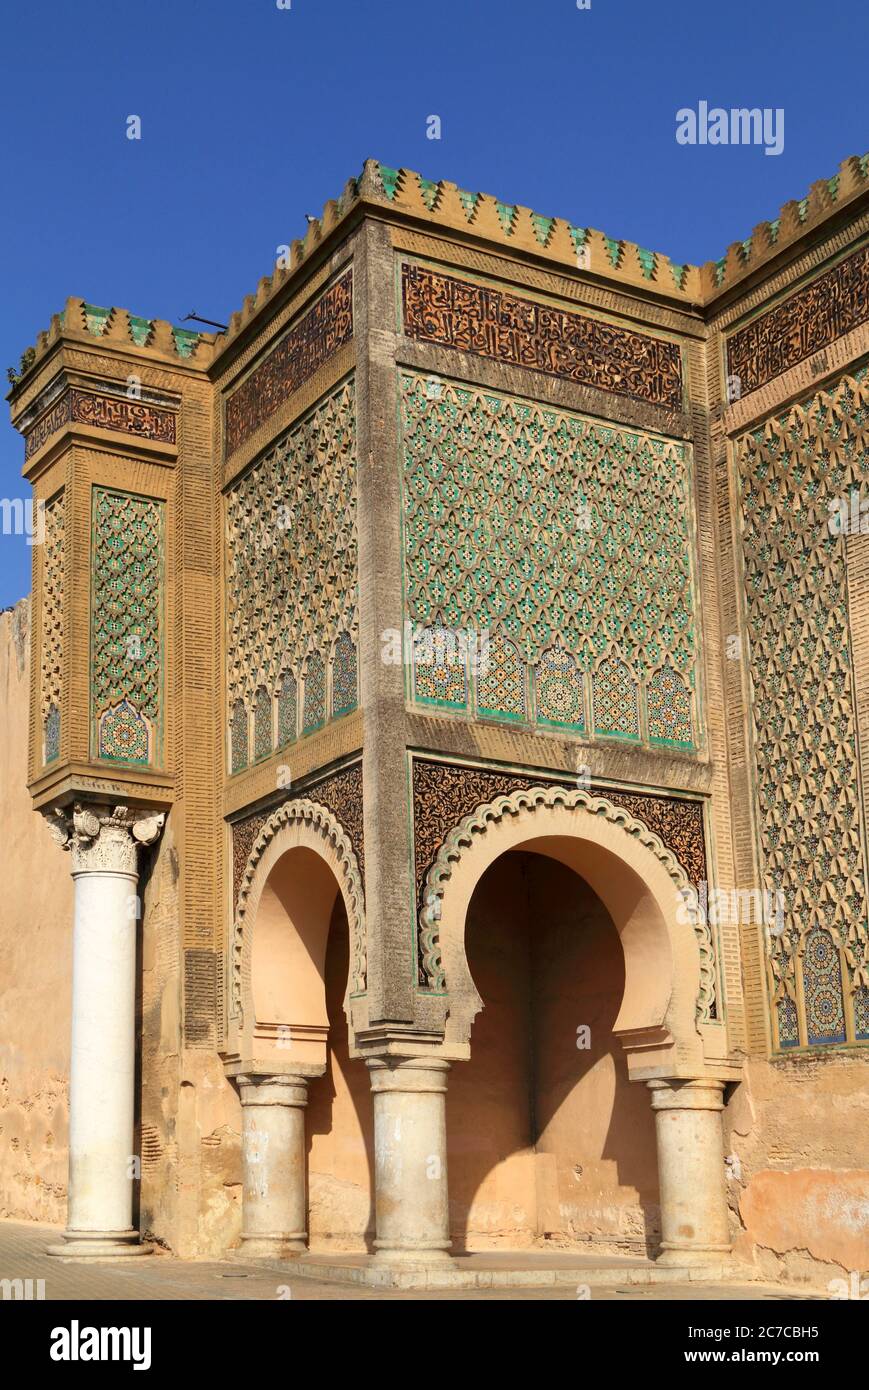 Morocco, Meknes, Historical centre. Detail of the famous medieval Bab Mansour gate. Stock Photo